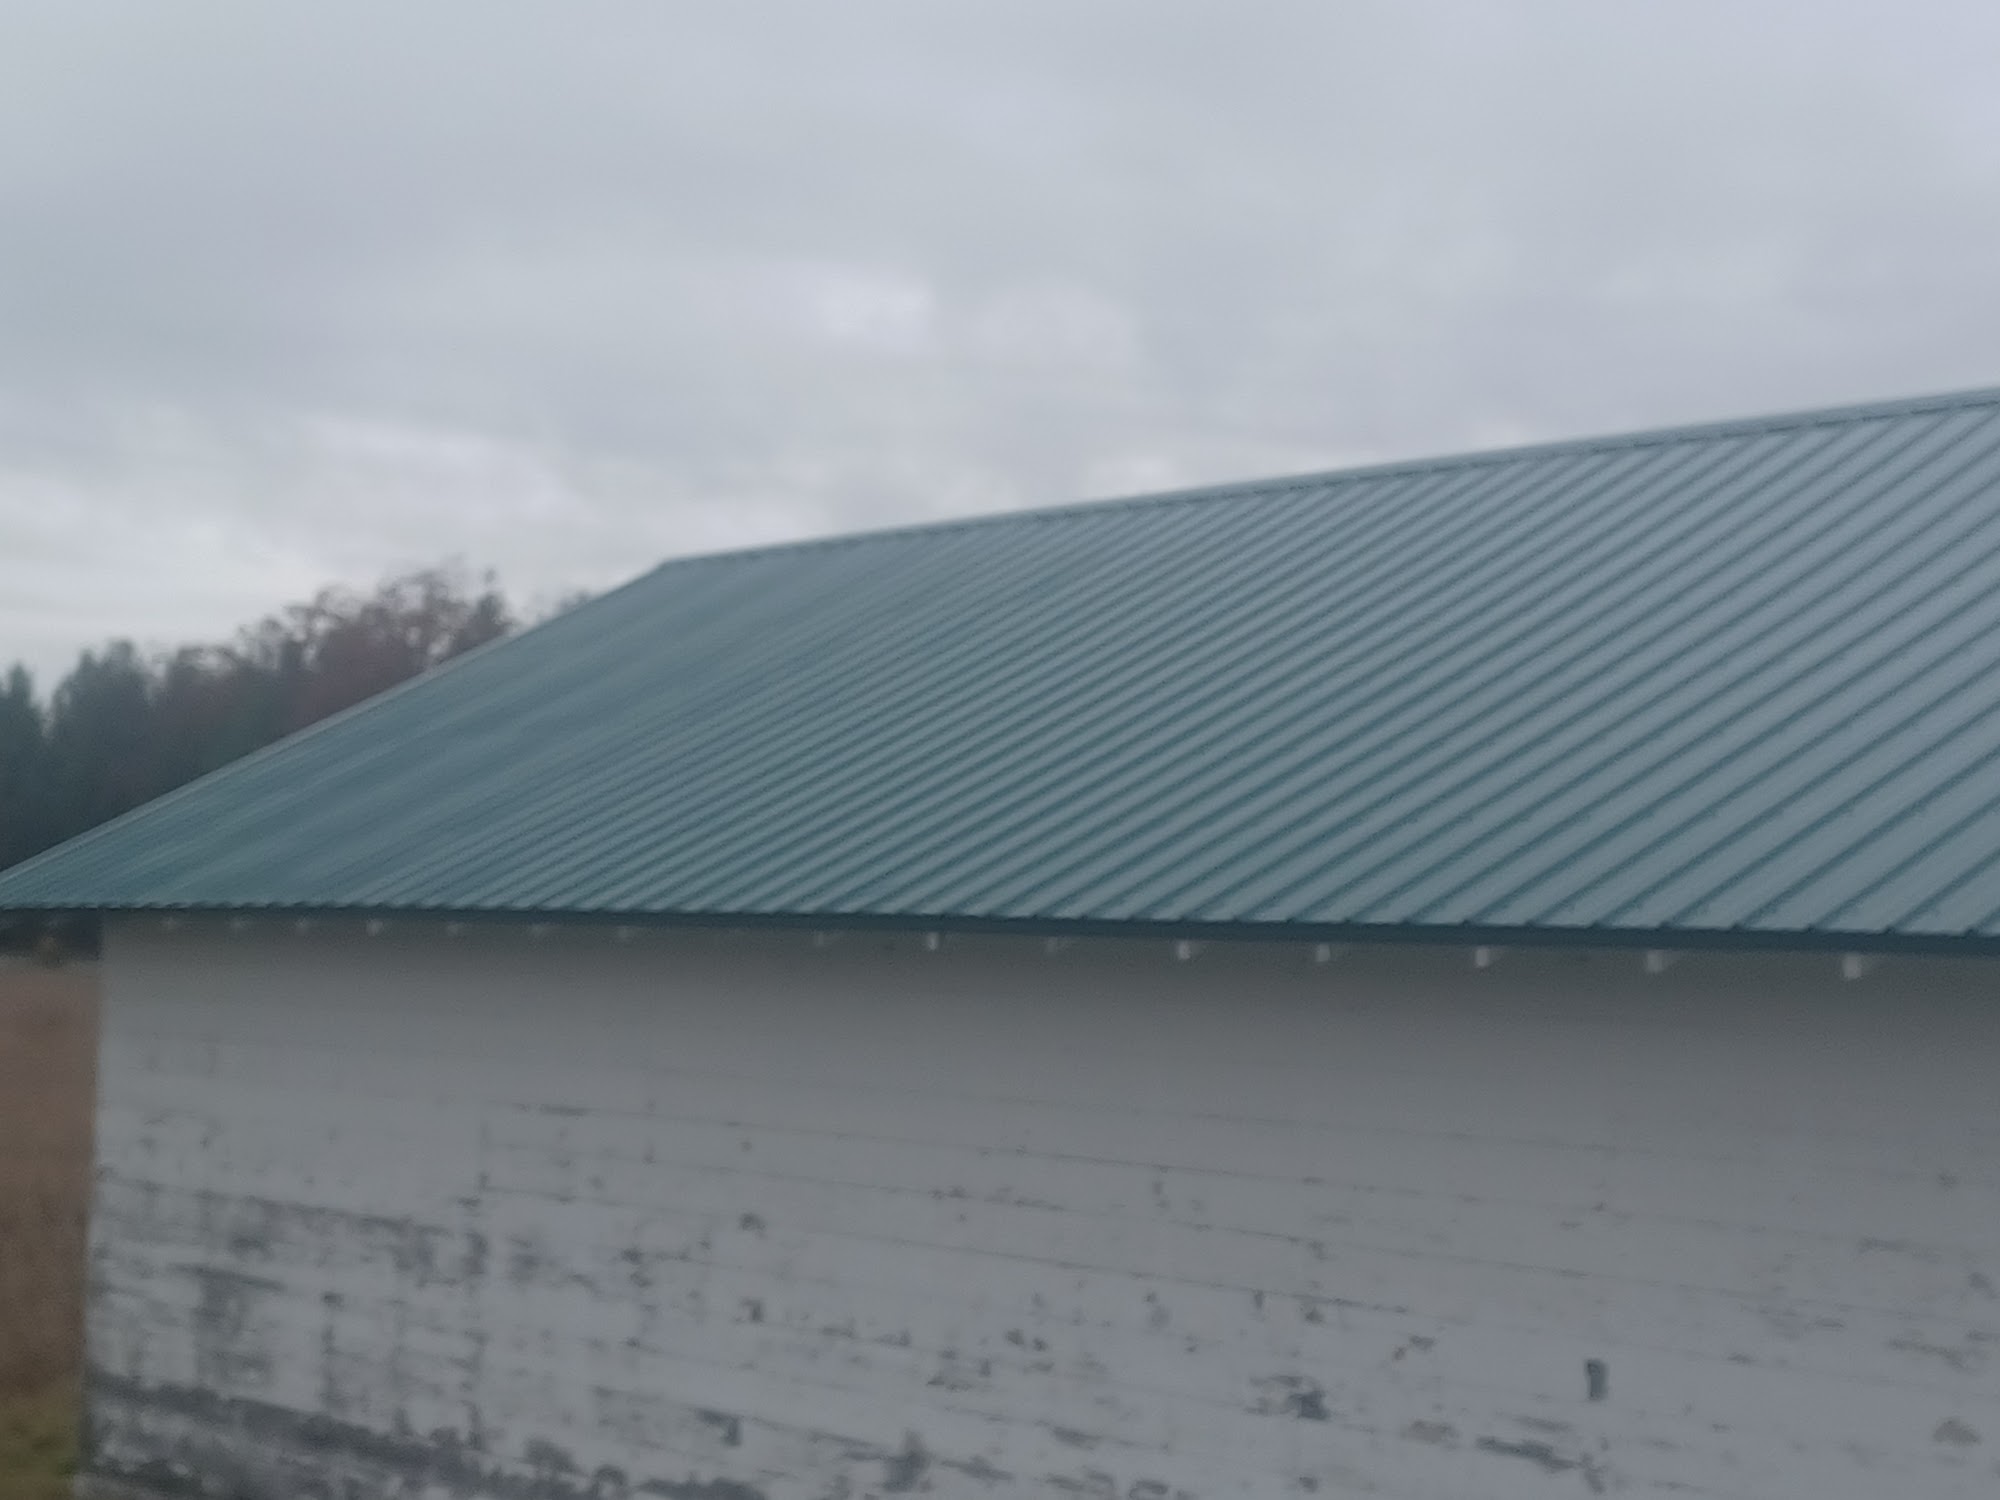 Mike's Roofing Siding & Remodeling LLC 1728 N Tuttle Rd, Scottville Michigan 49454